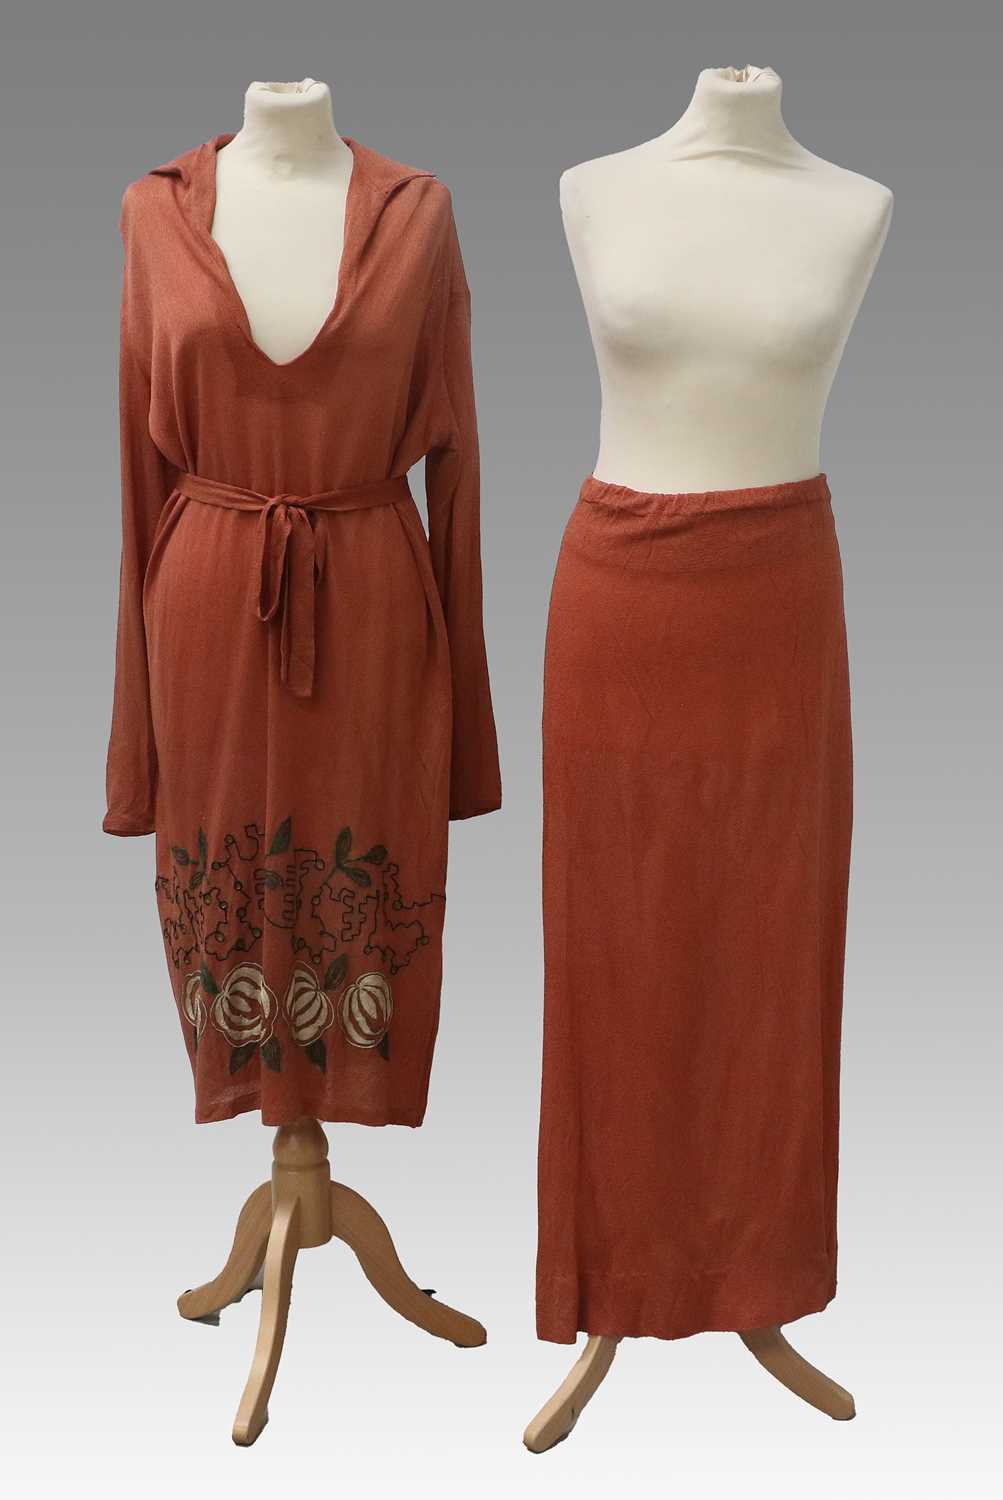 Circa 1920s Floral Chiffon Evening Dress with scooped neck and black chiffon collar and matching